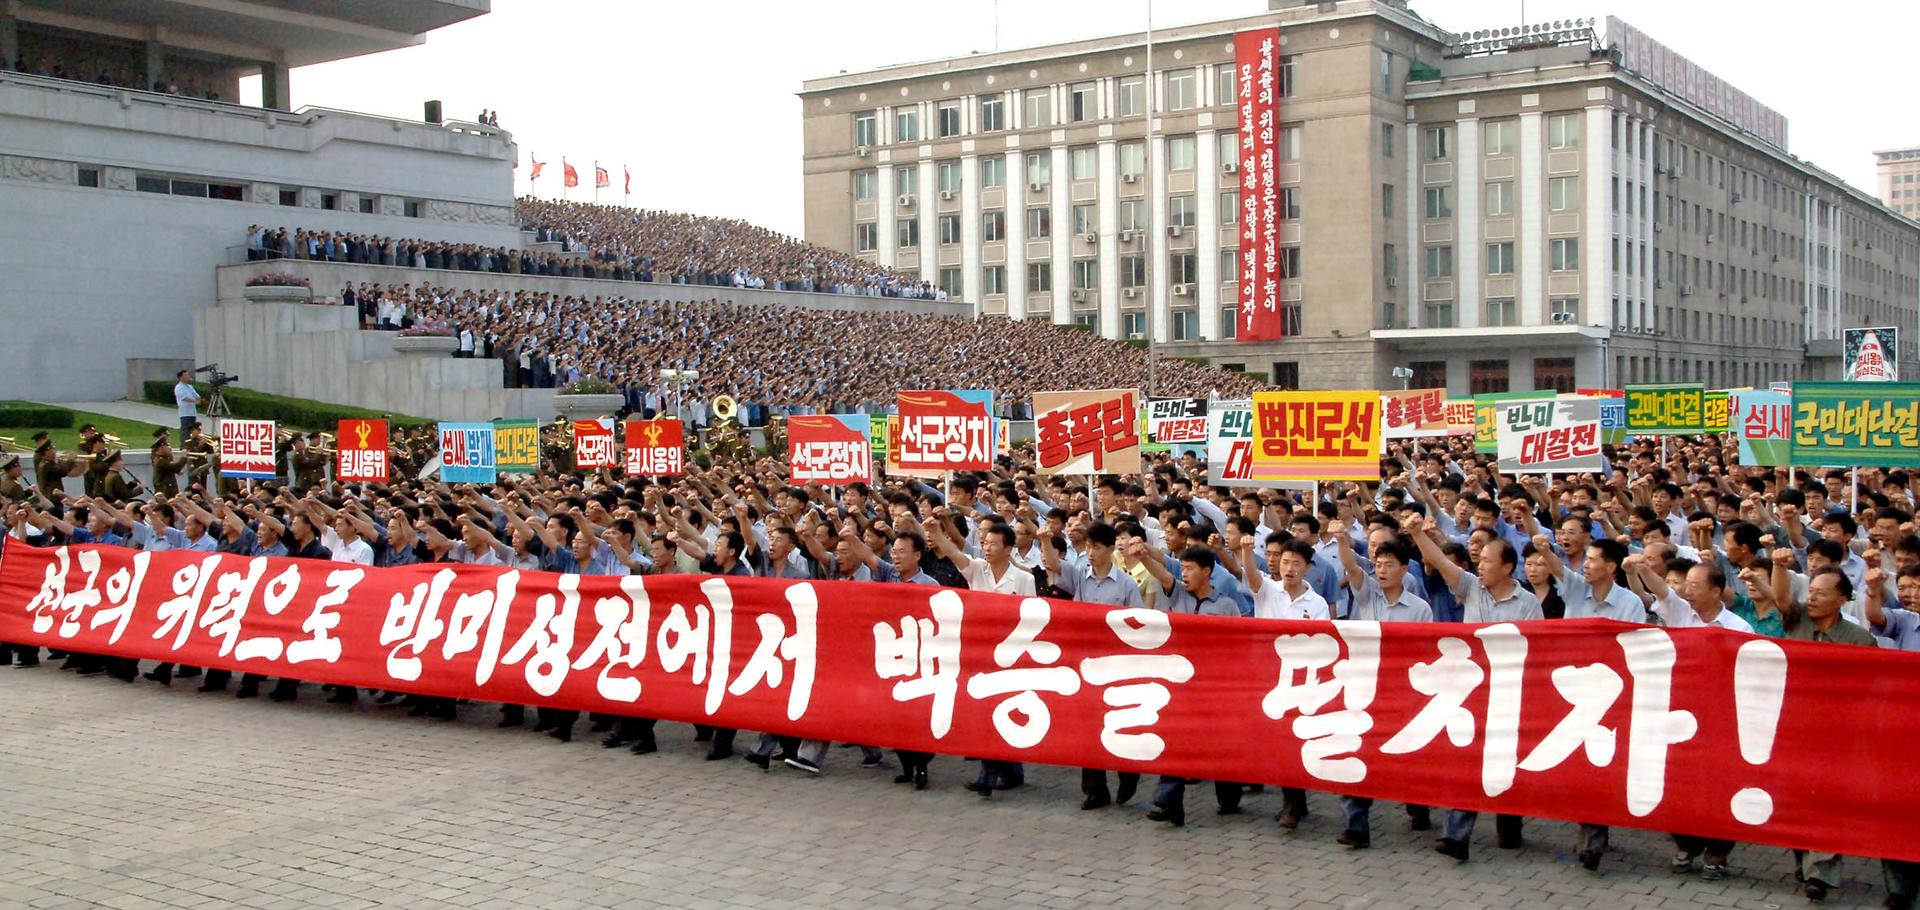 People attend a mass rally against "U.S. Imperialists" at Kim Il Sung Square in Pyongyang in this undated photo released by North Korea's Korean Central News Agency (KCNA) in Pyongyang June 25, 2014.